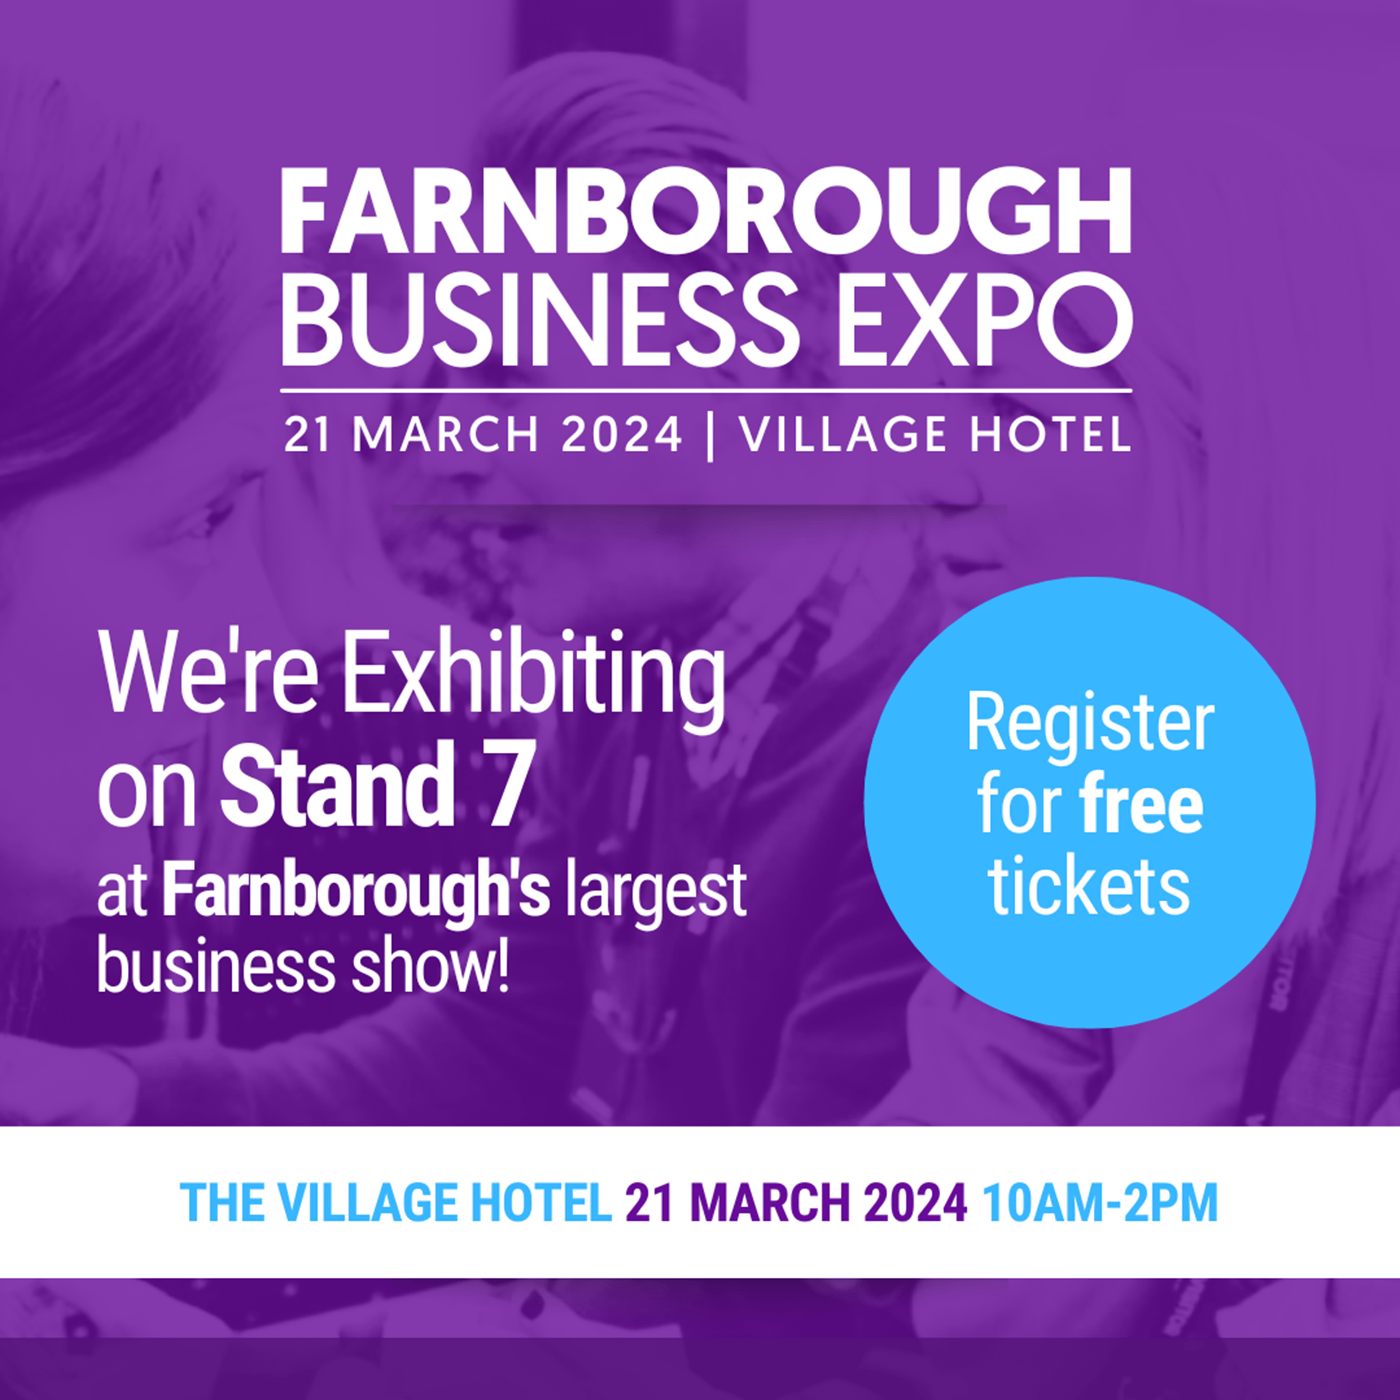 We're exhibiting at the Farnborough Business Expo on Thursday 21 March 2024